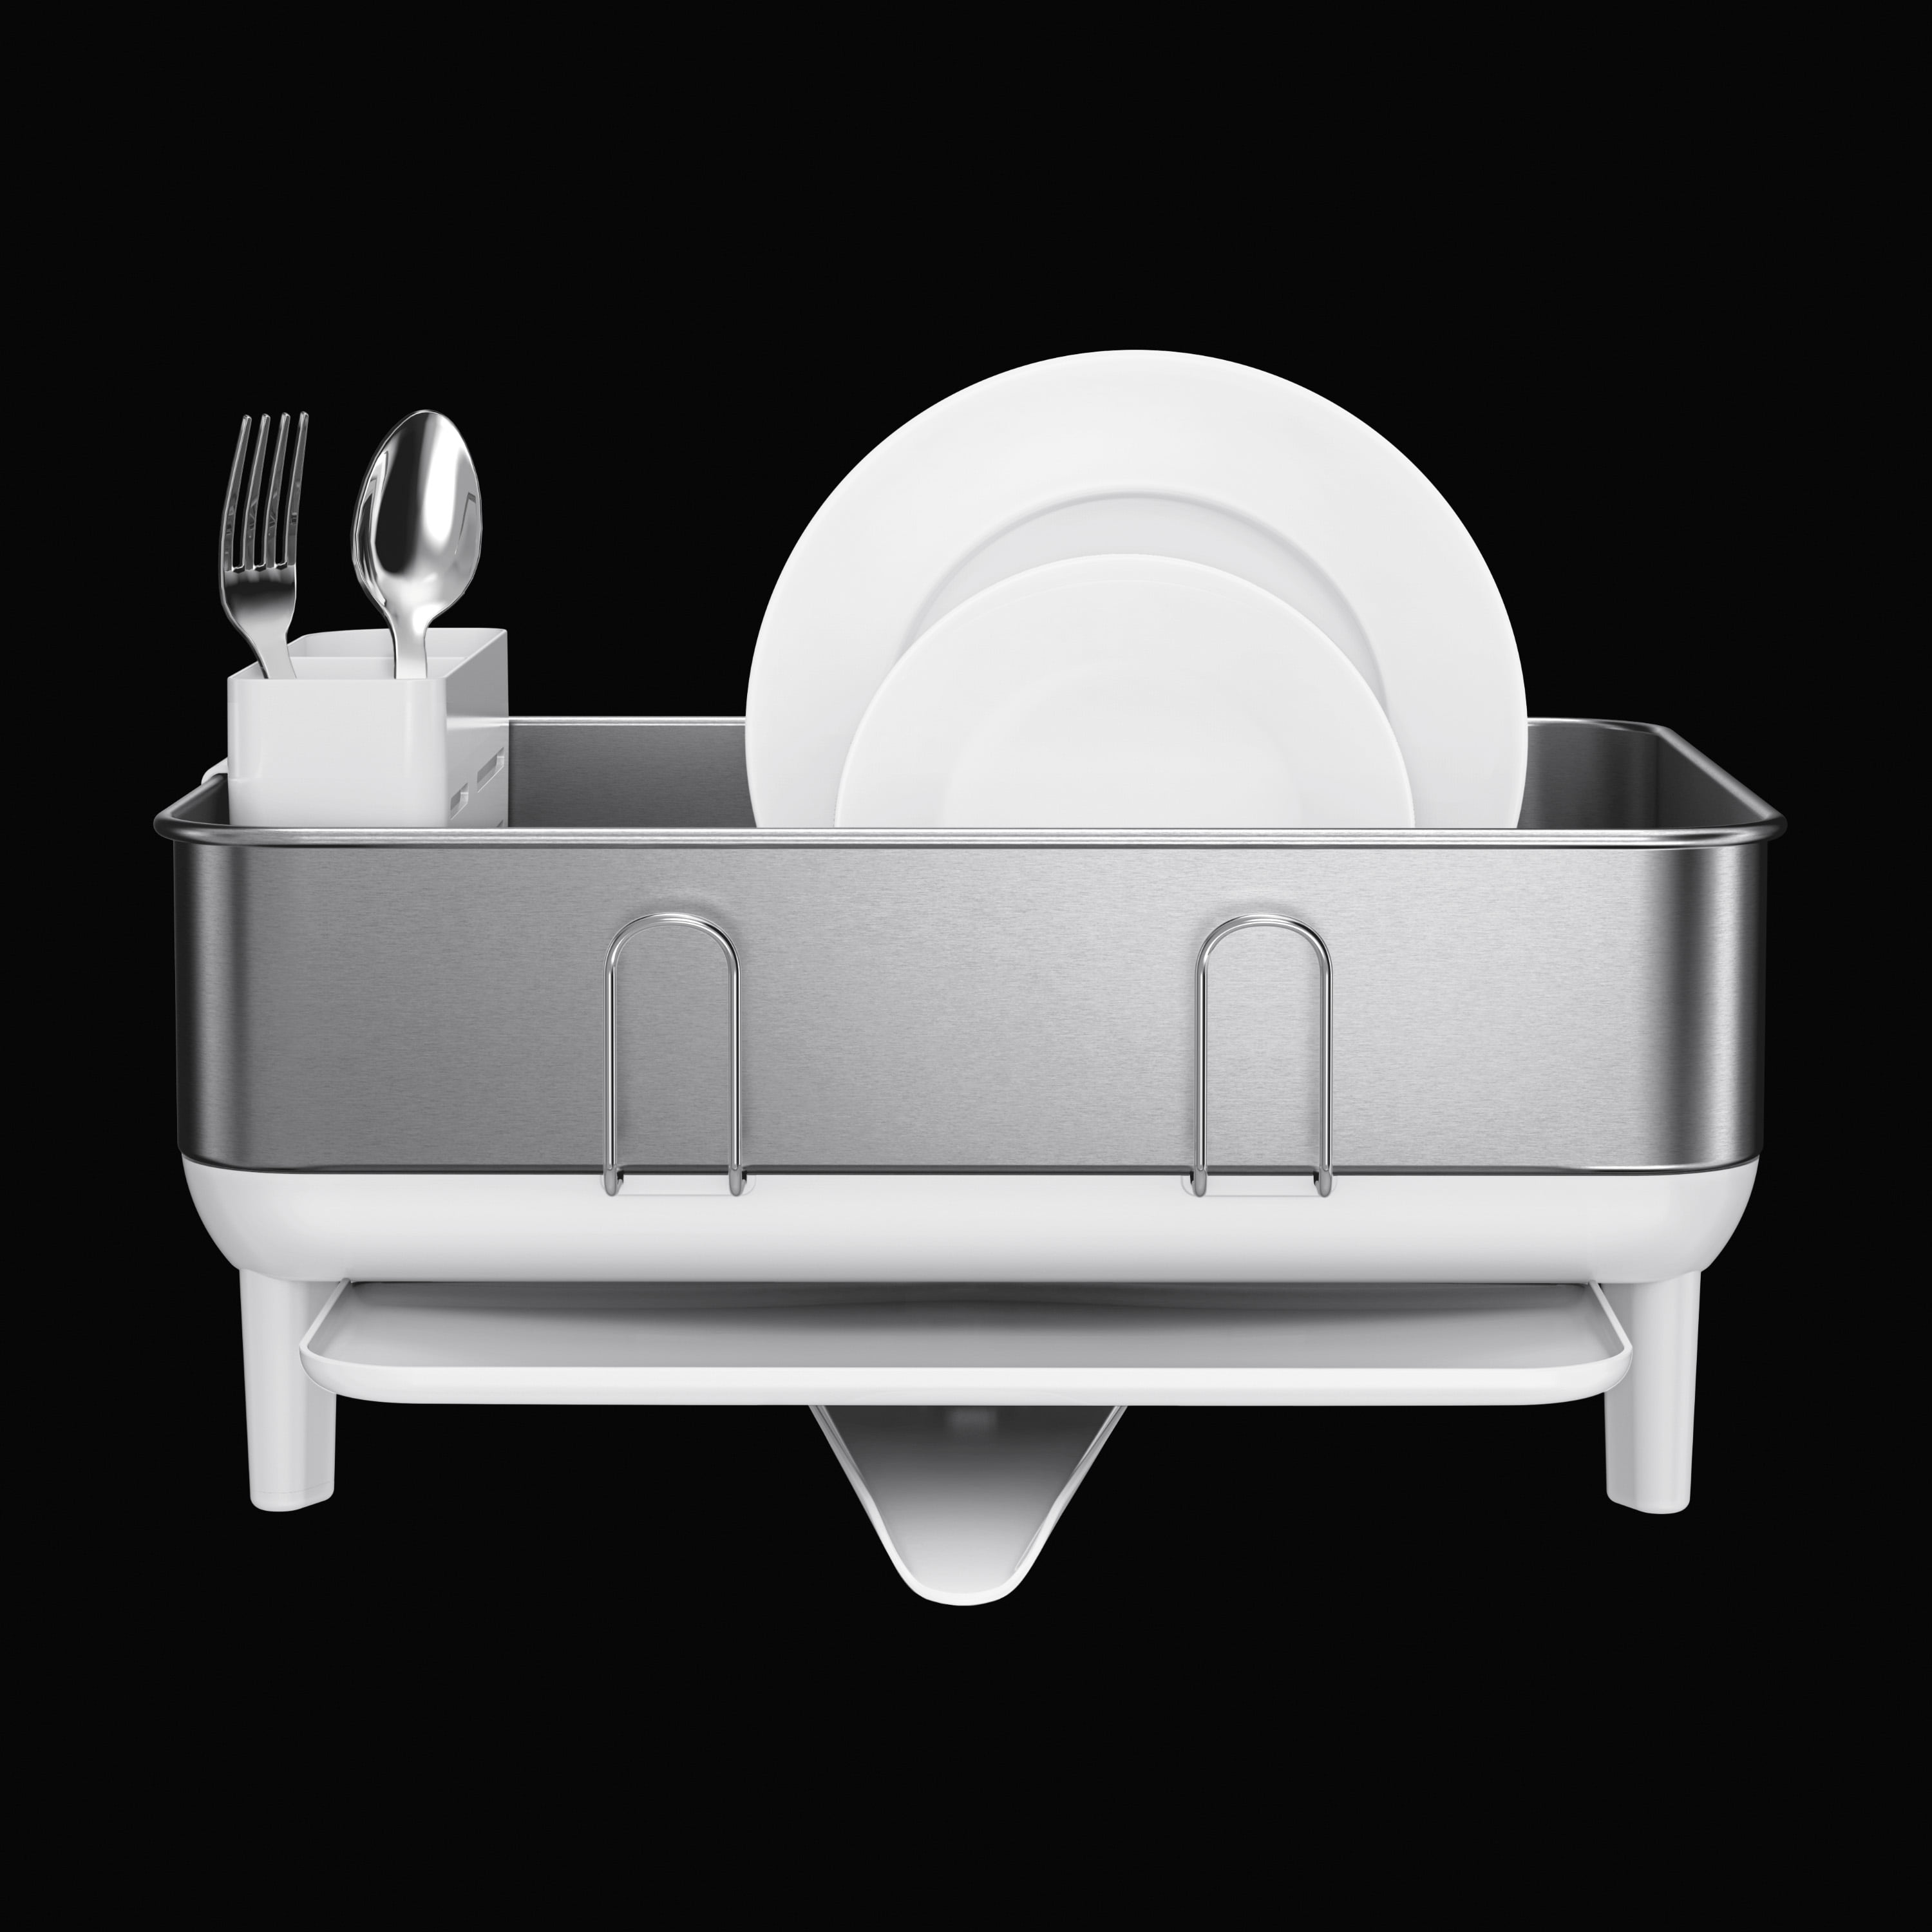 simplehuman Compact Steel Frame Dish Rack, Brushed Stainless Steel, White